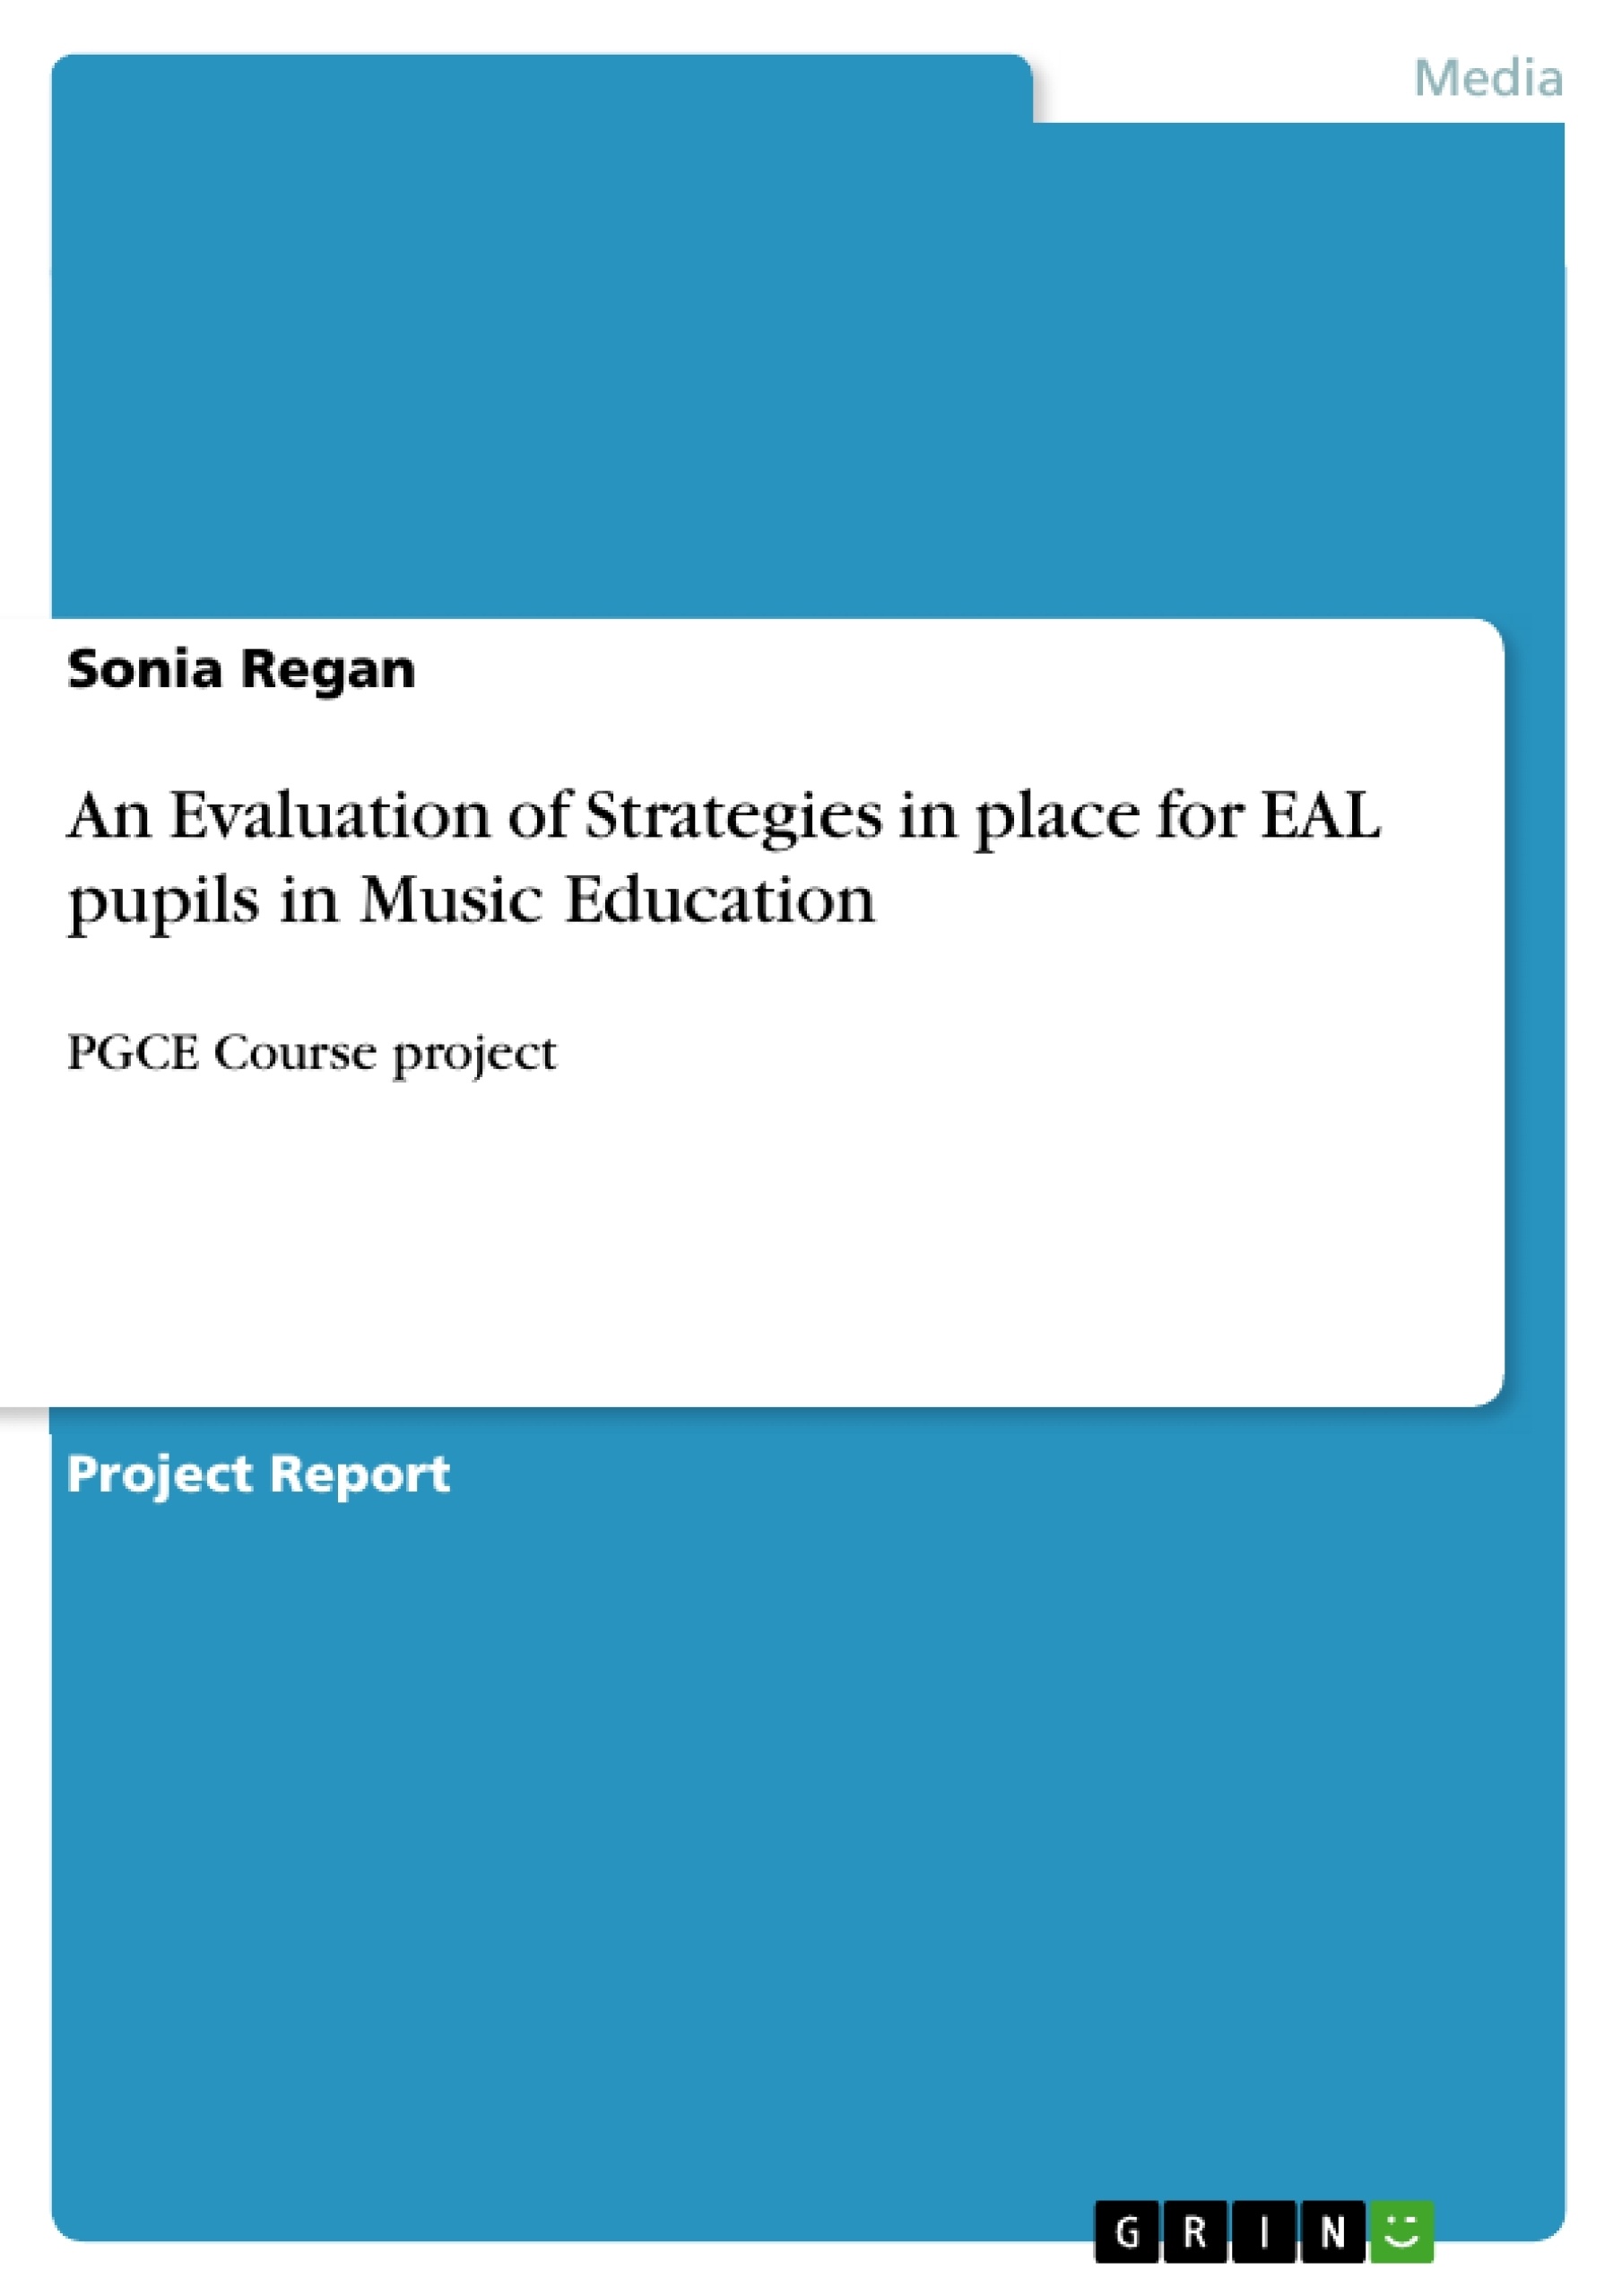 Title: An Evaluation of Strategies in place for EAL pupils in Music Education